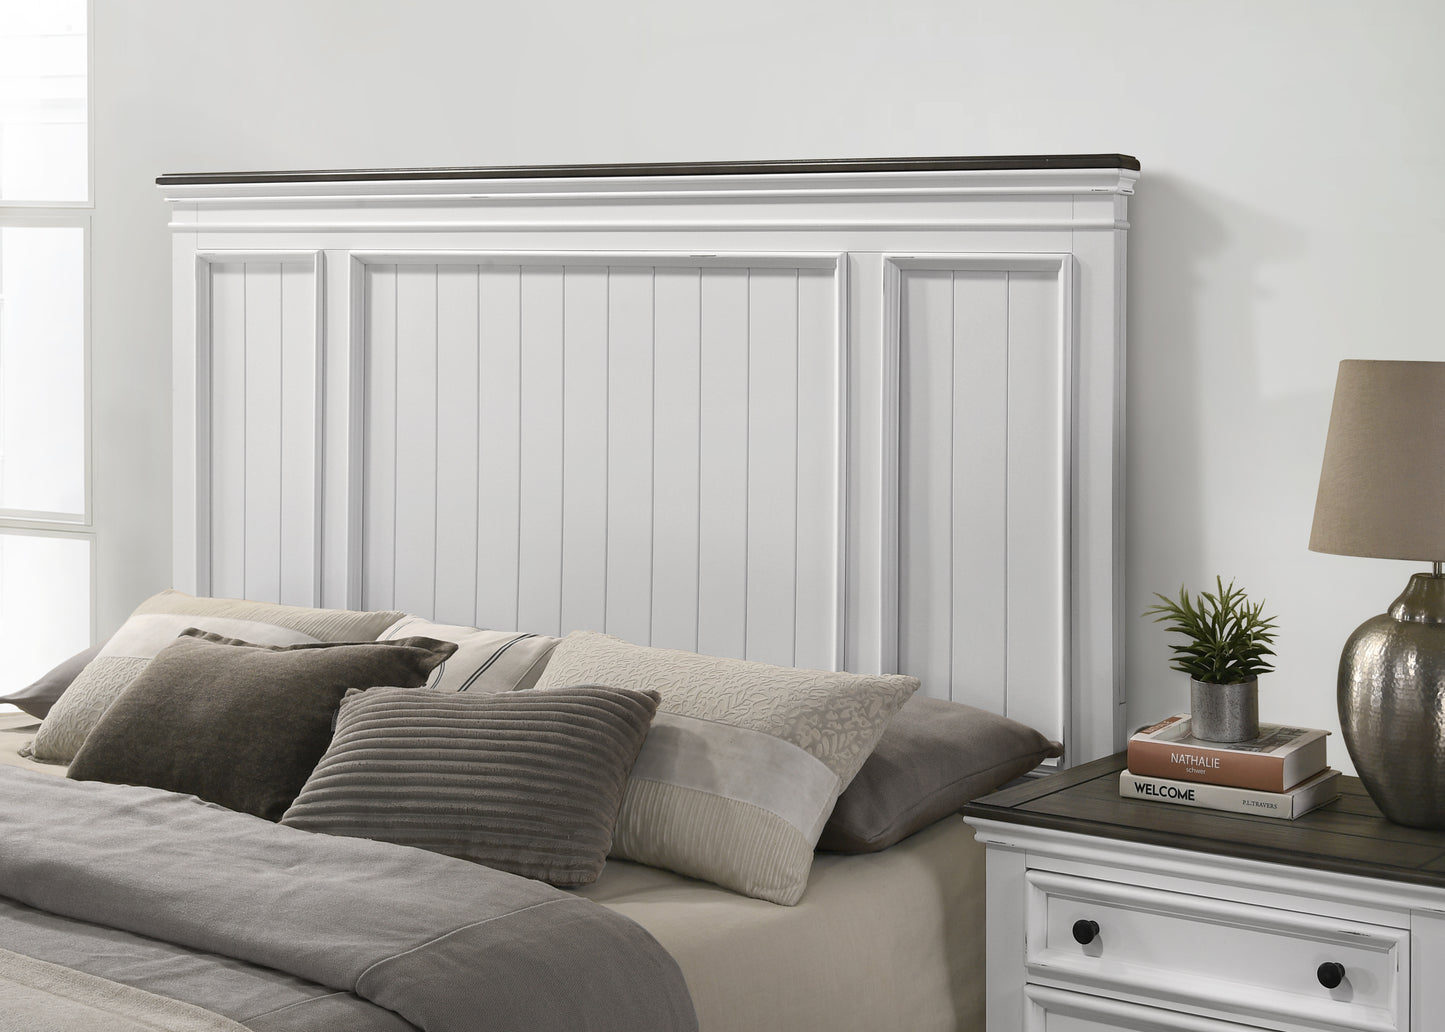 Clelane Wood Bedroom Set with Shiplap Panel Bedroom Collection, Weathered White and Gray